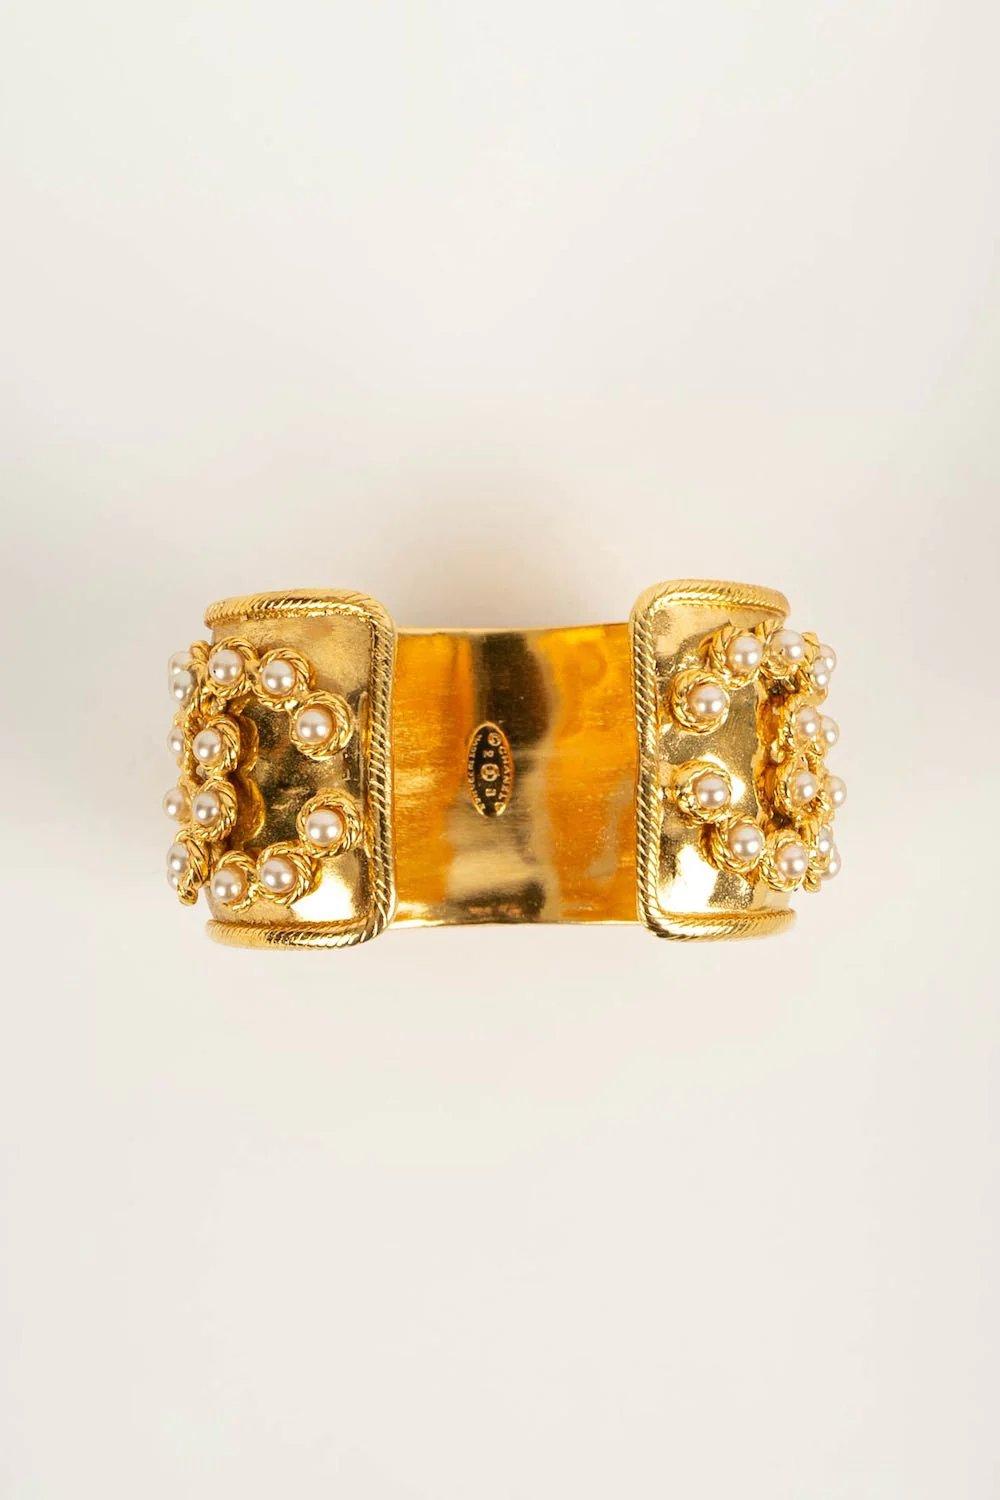 Chanel Cuff Bracelet in Gilded Metal and Cabochons In Excellent Condition For Sale In SAINT-OUEN-SUR-SEINE, FR